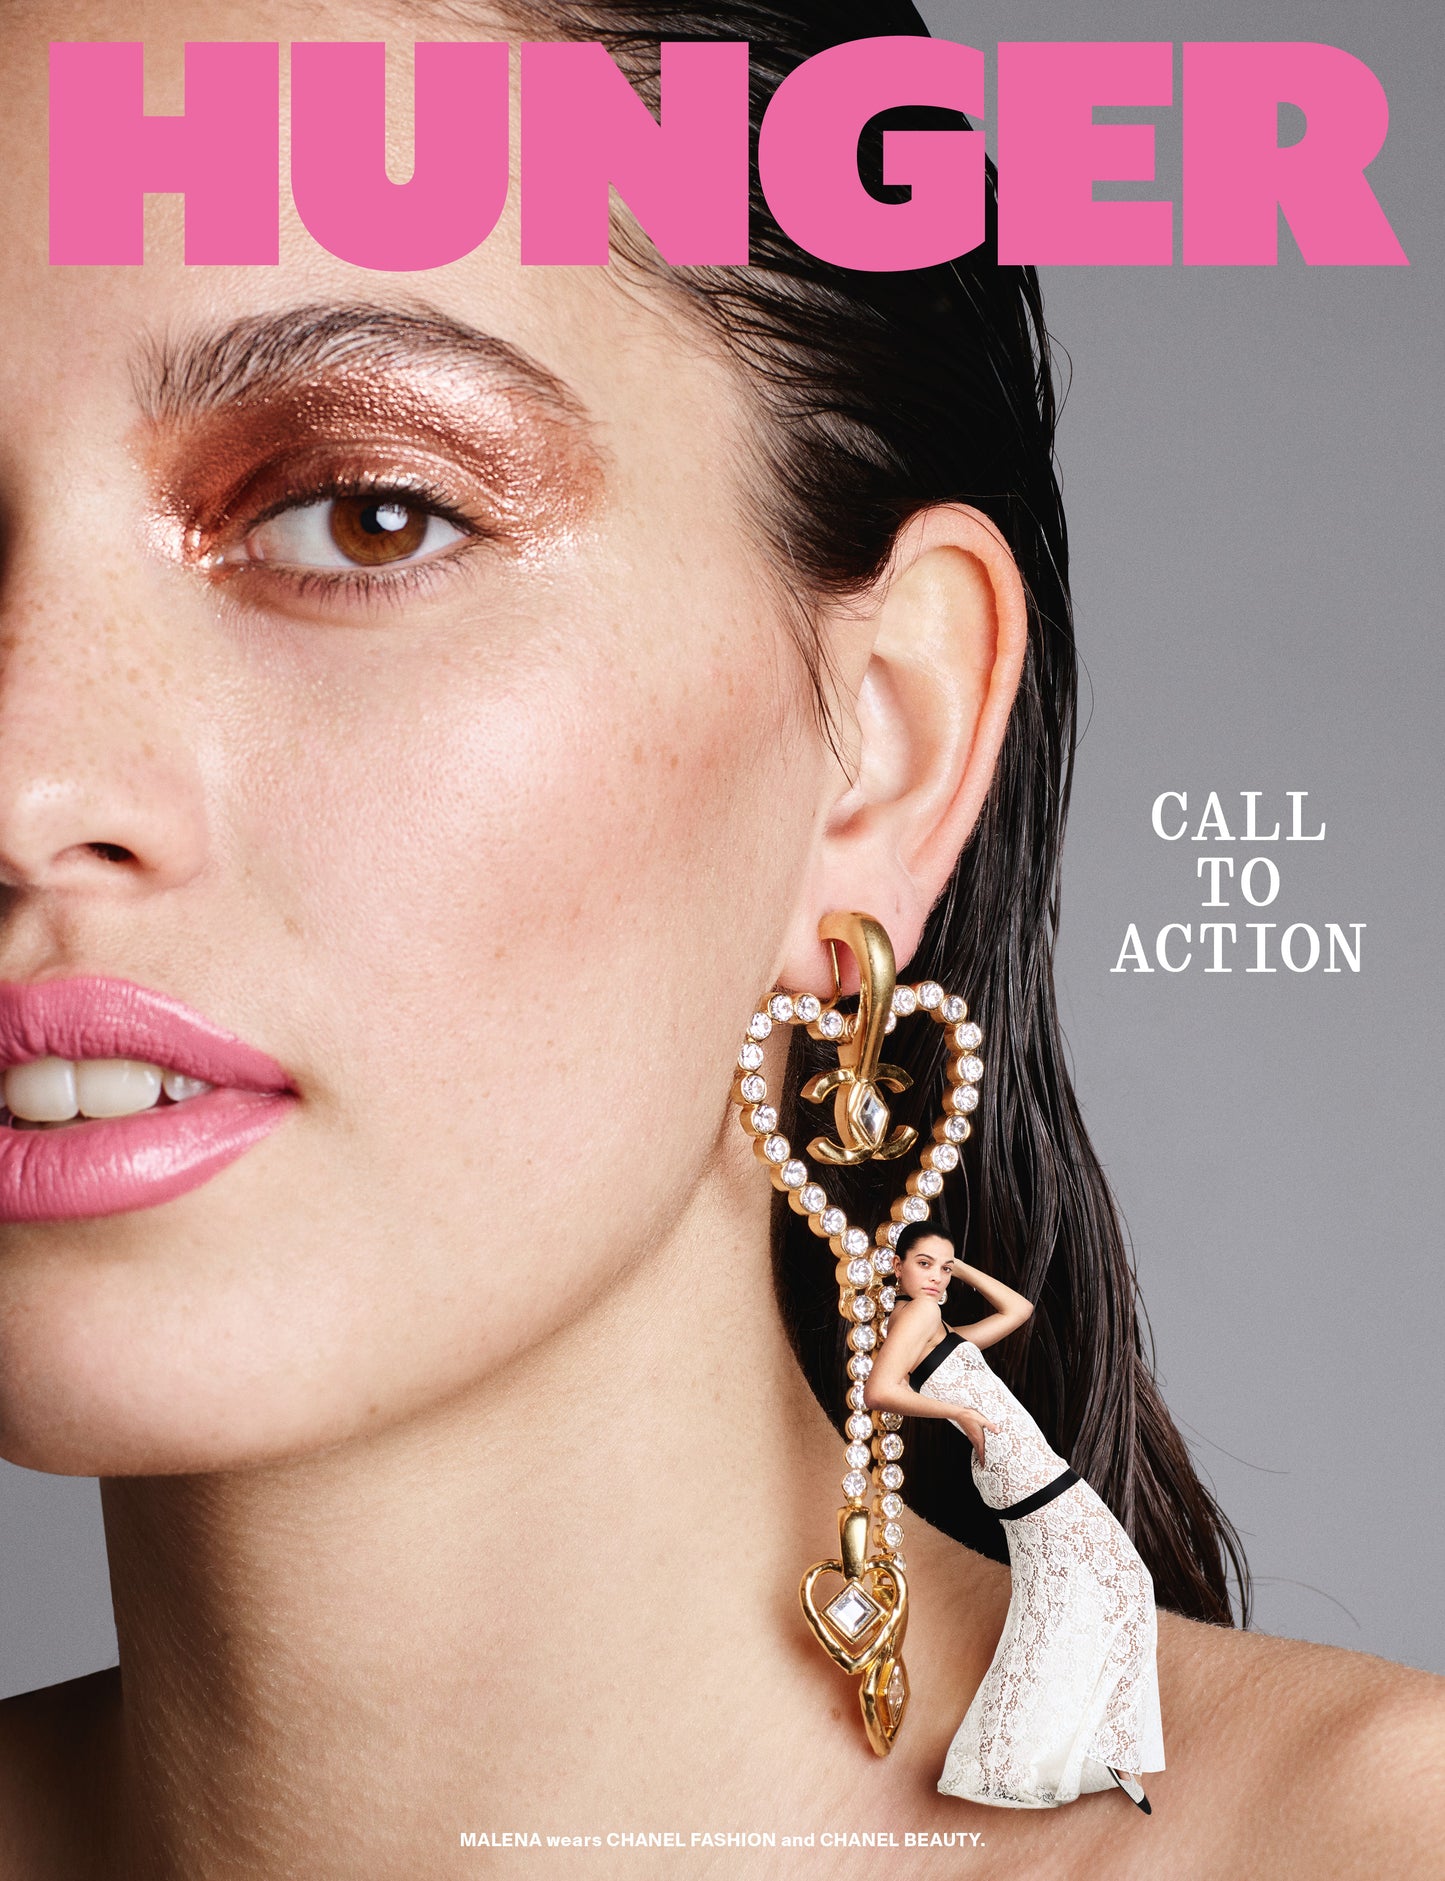 Malena covers the Call To Action issue in Chanel Fashion and Chanel Beauty